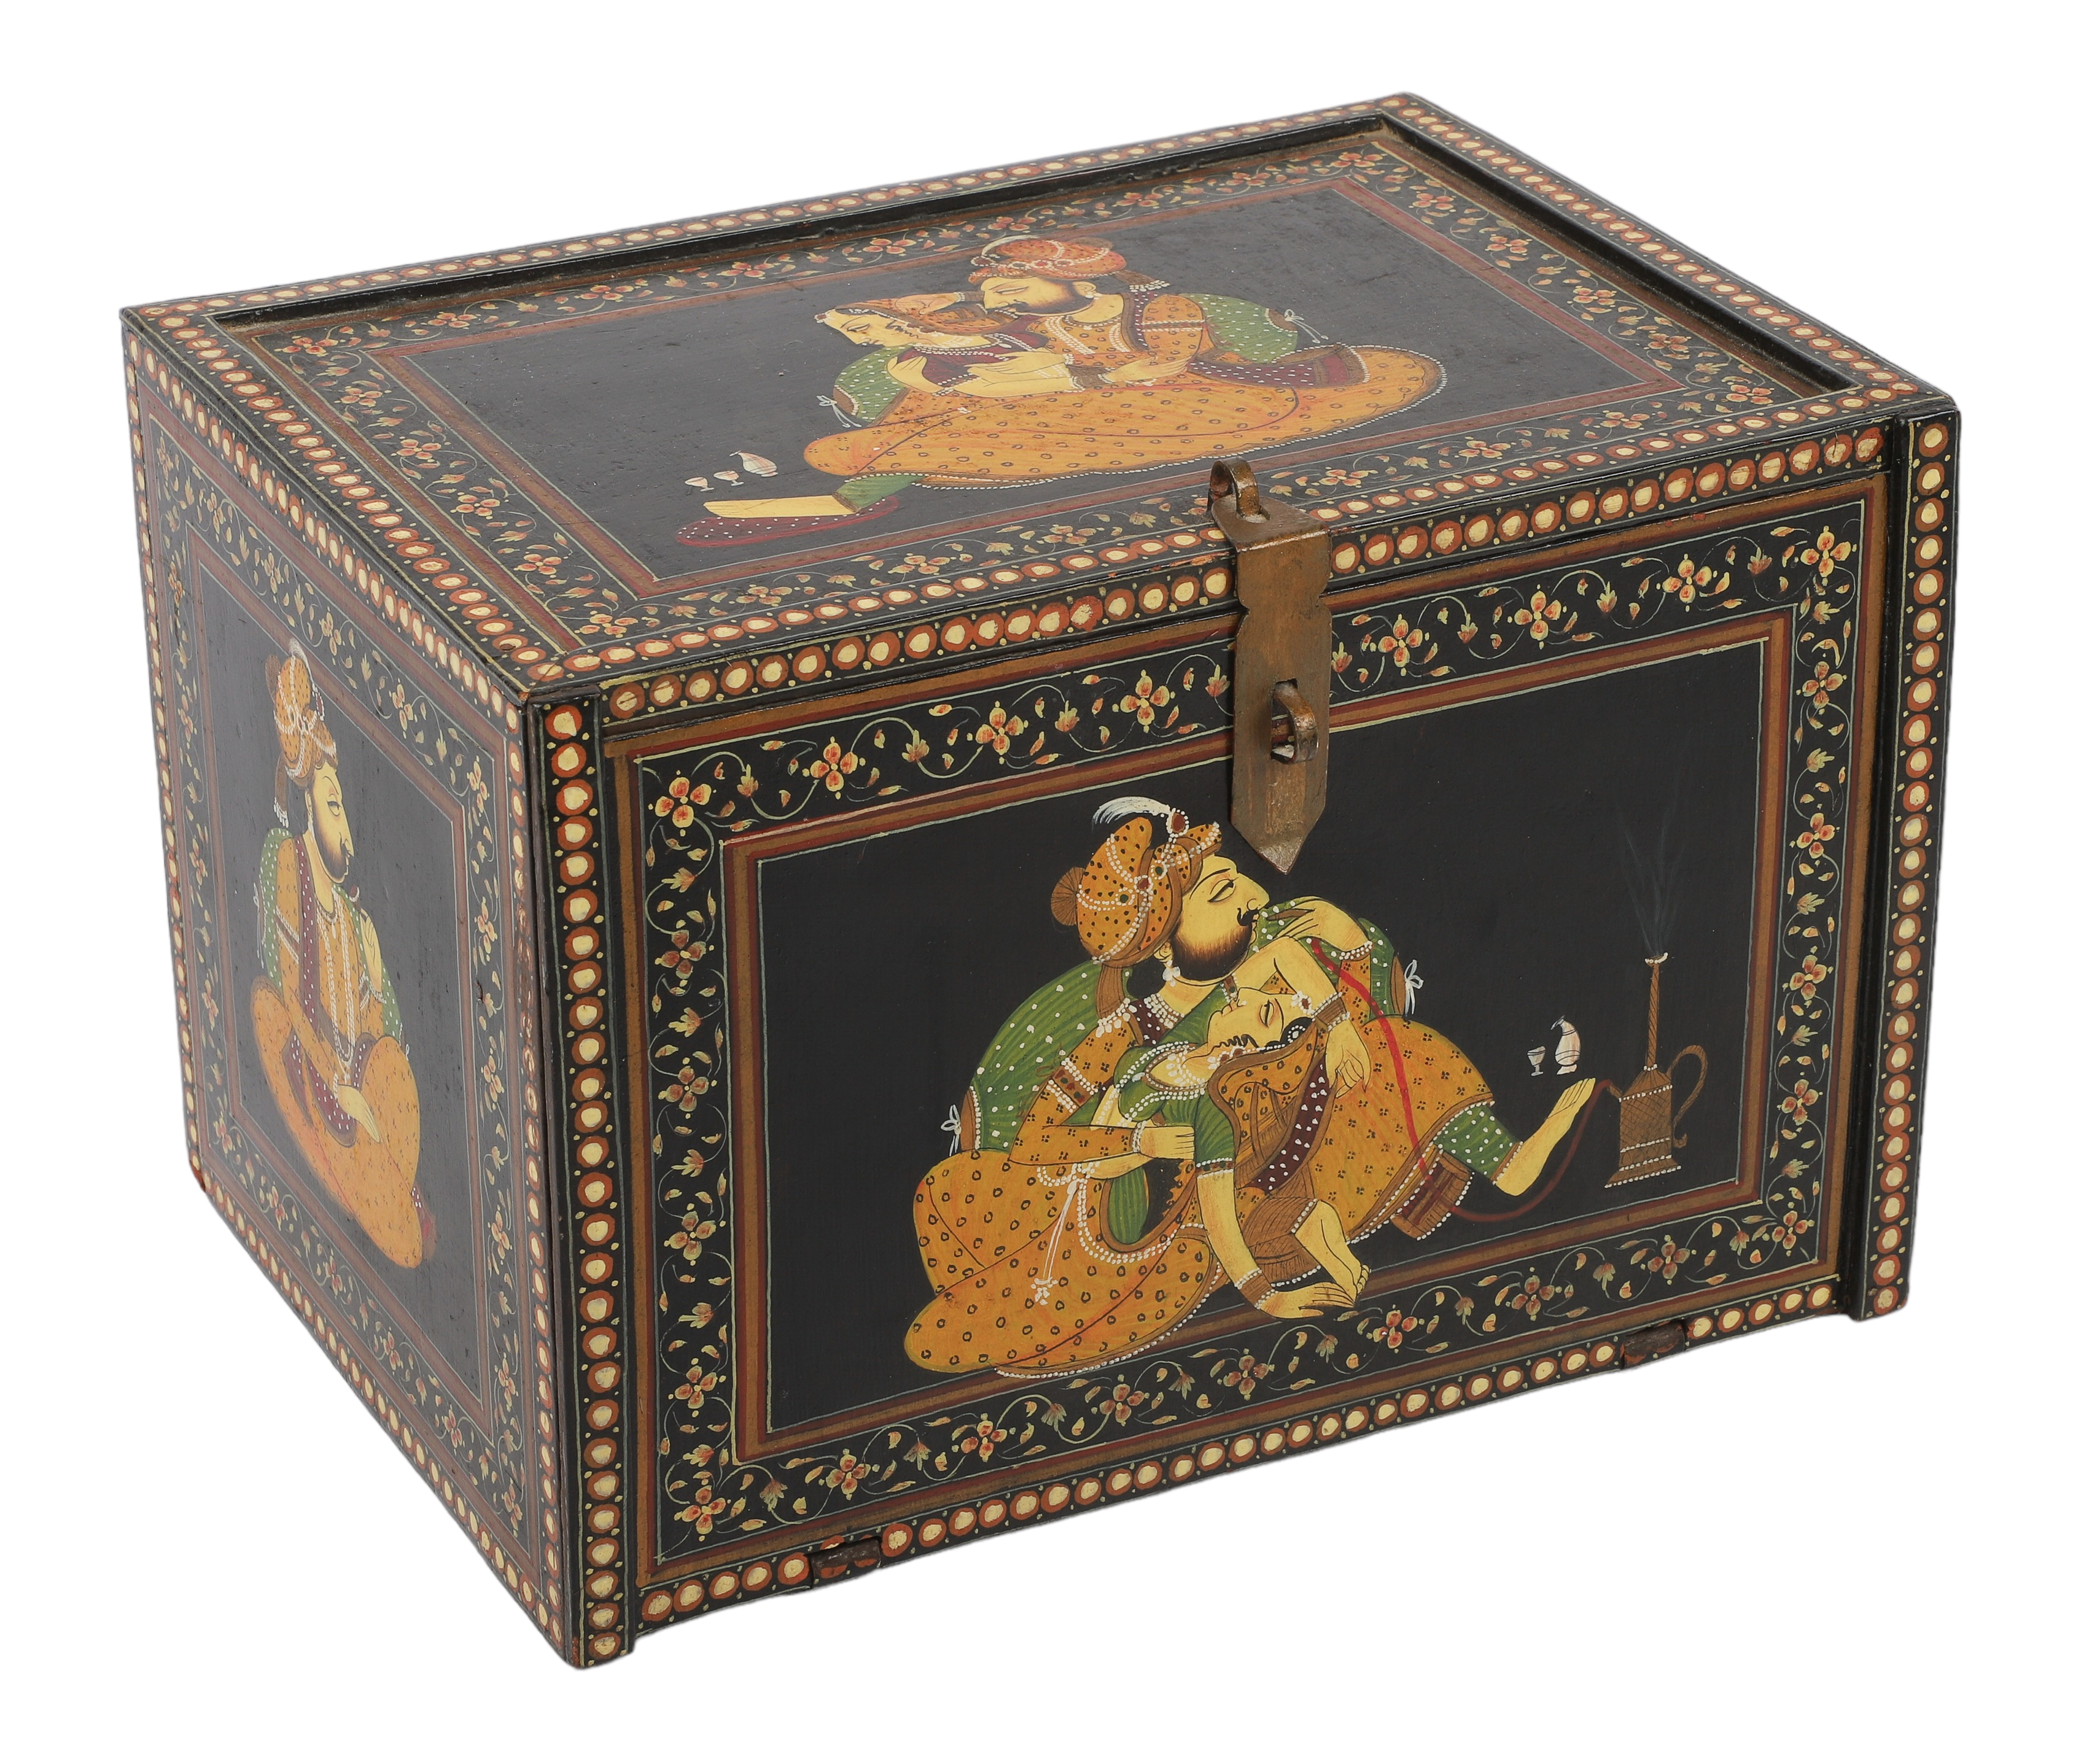 Indian Mughal style box with hand